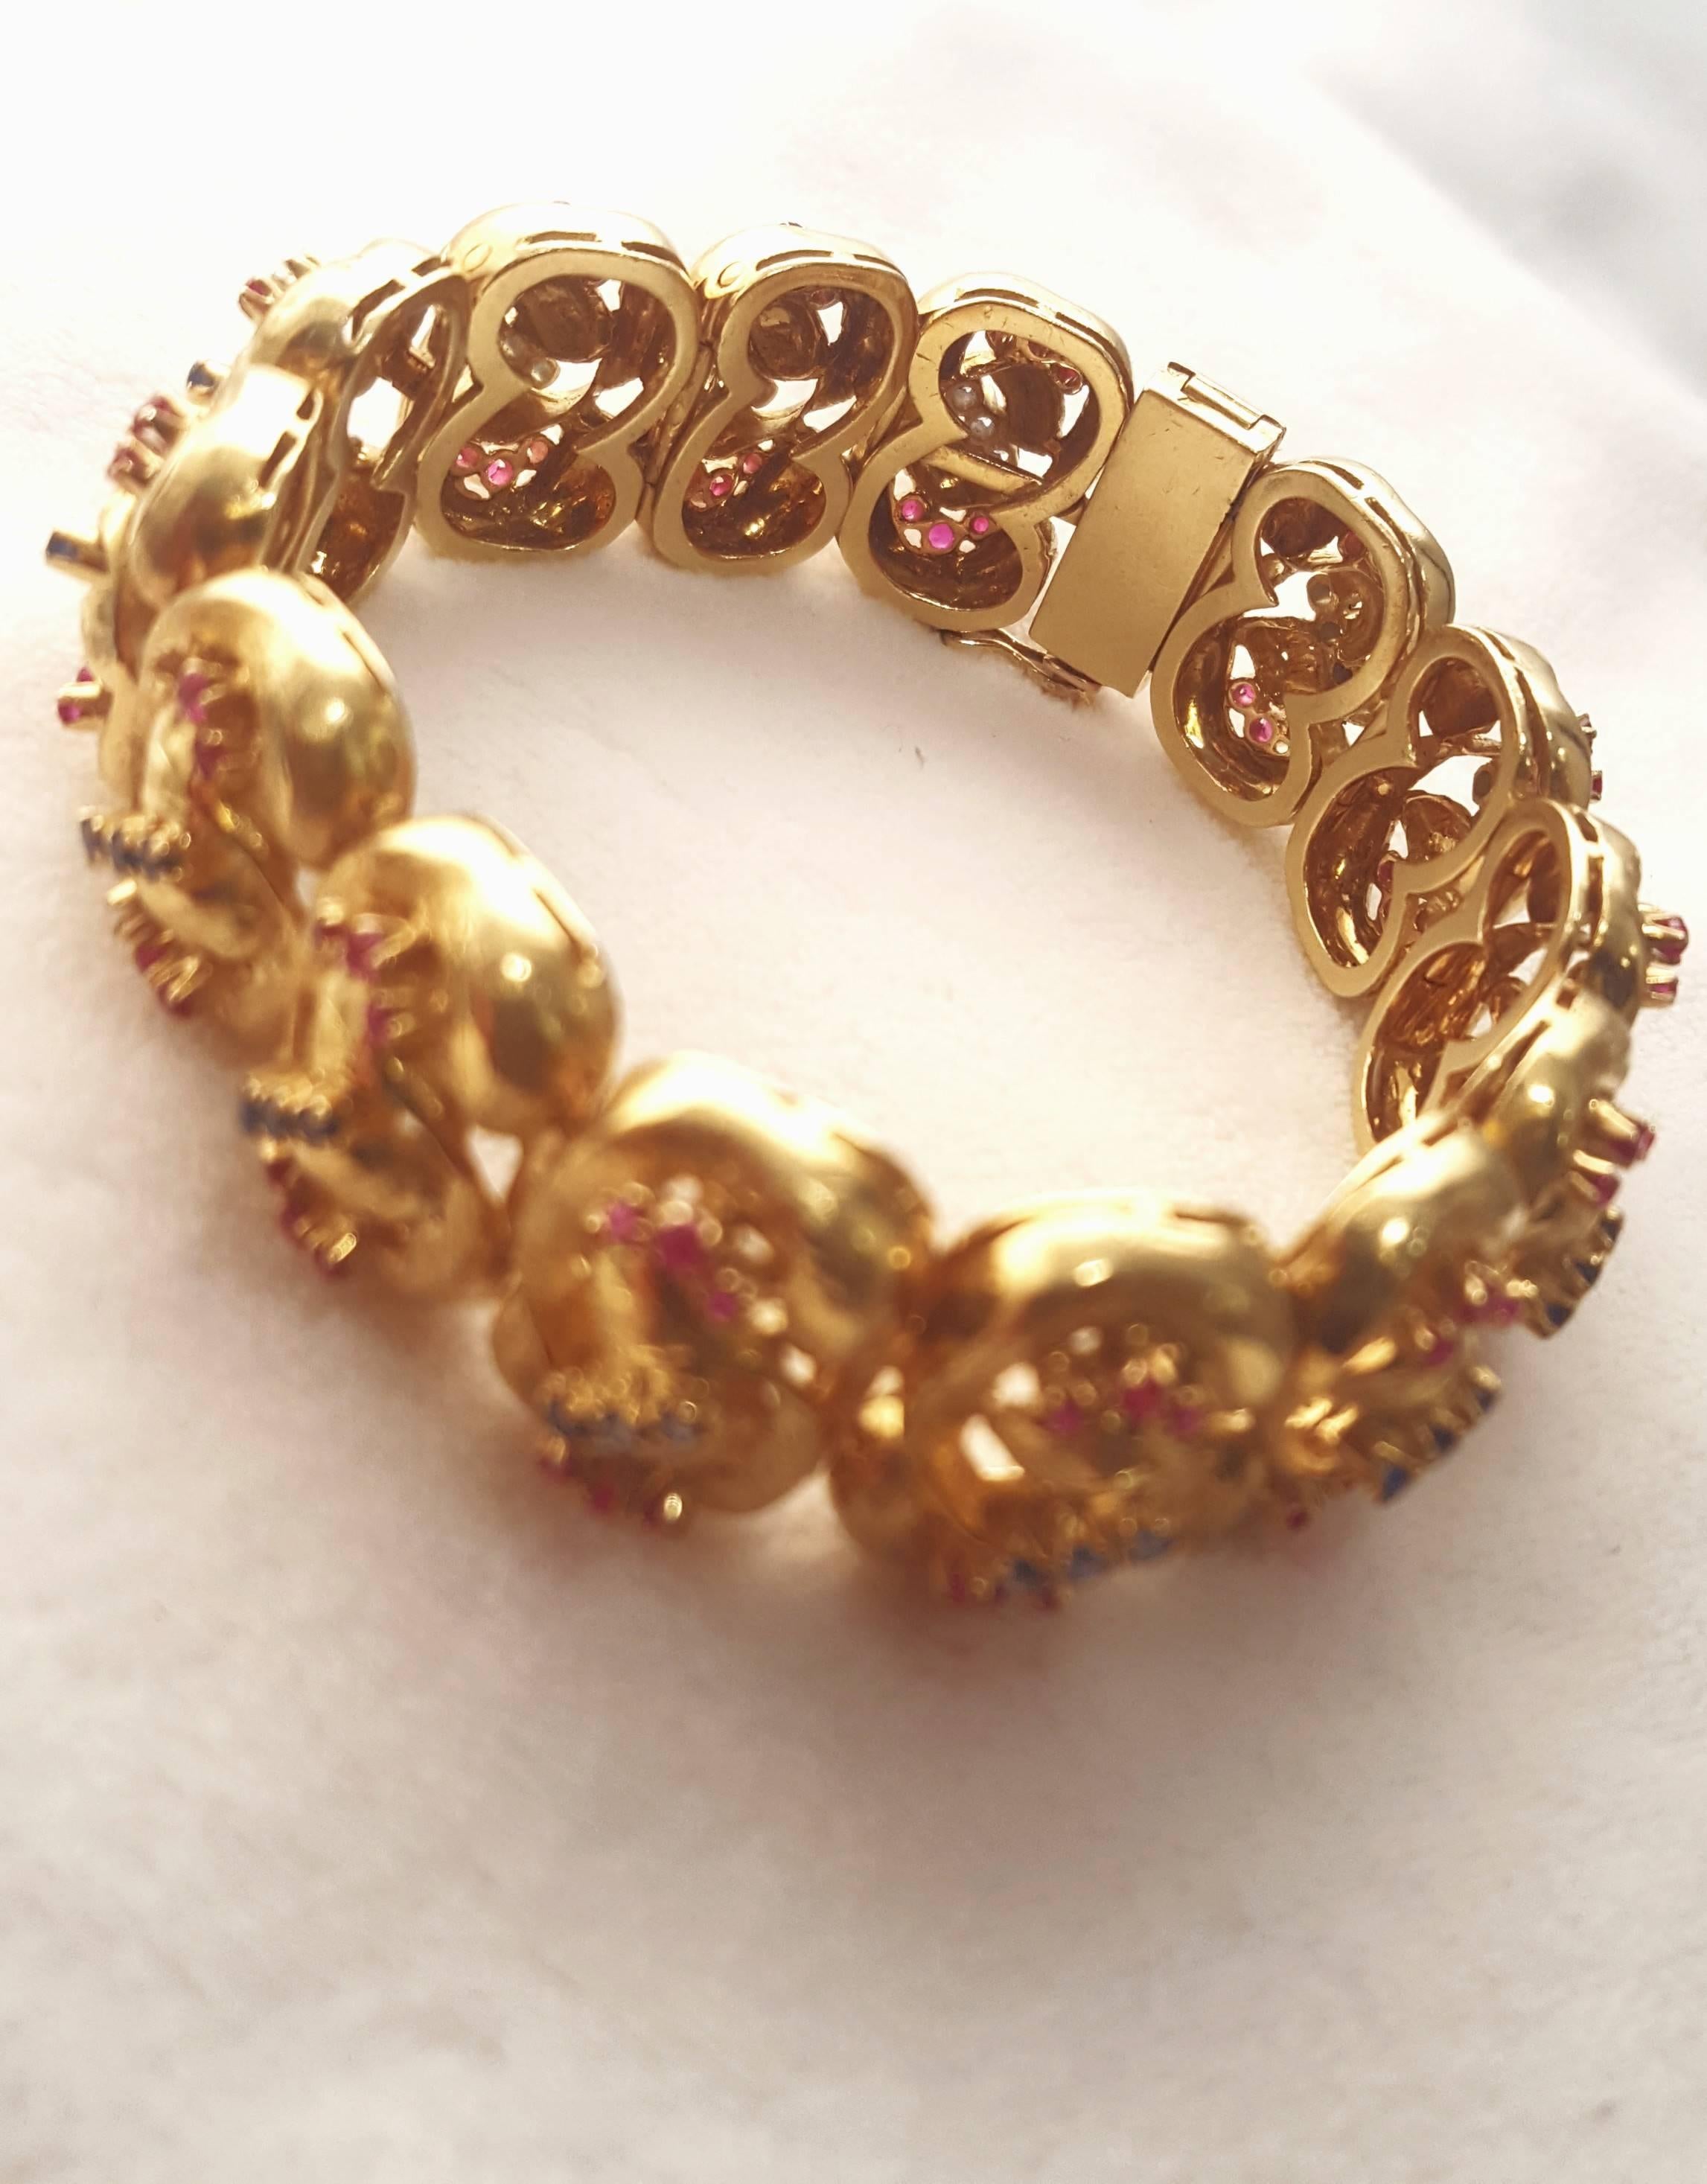 This fabulous 18 karat yellow gold bracelet was meticulously crafted in Italy in the 1970s.  Purchased at a Christies Auction in 1989 for $9500 when gold sold under $400 an ounce (April 27, 2018 it is $1326.60)! Every sensually curved link is